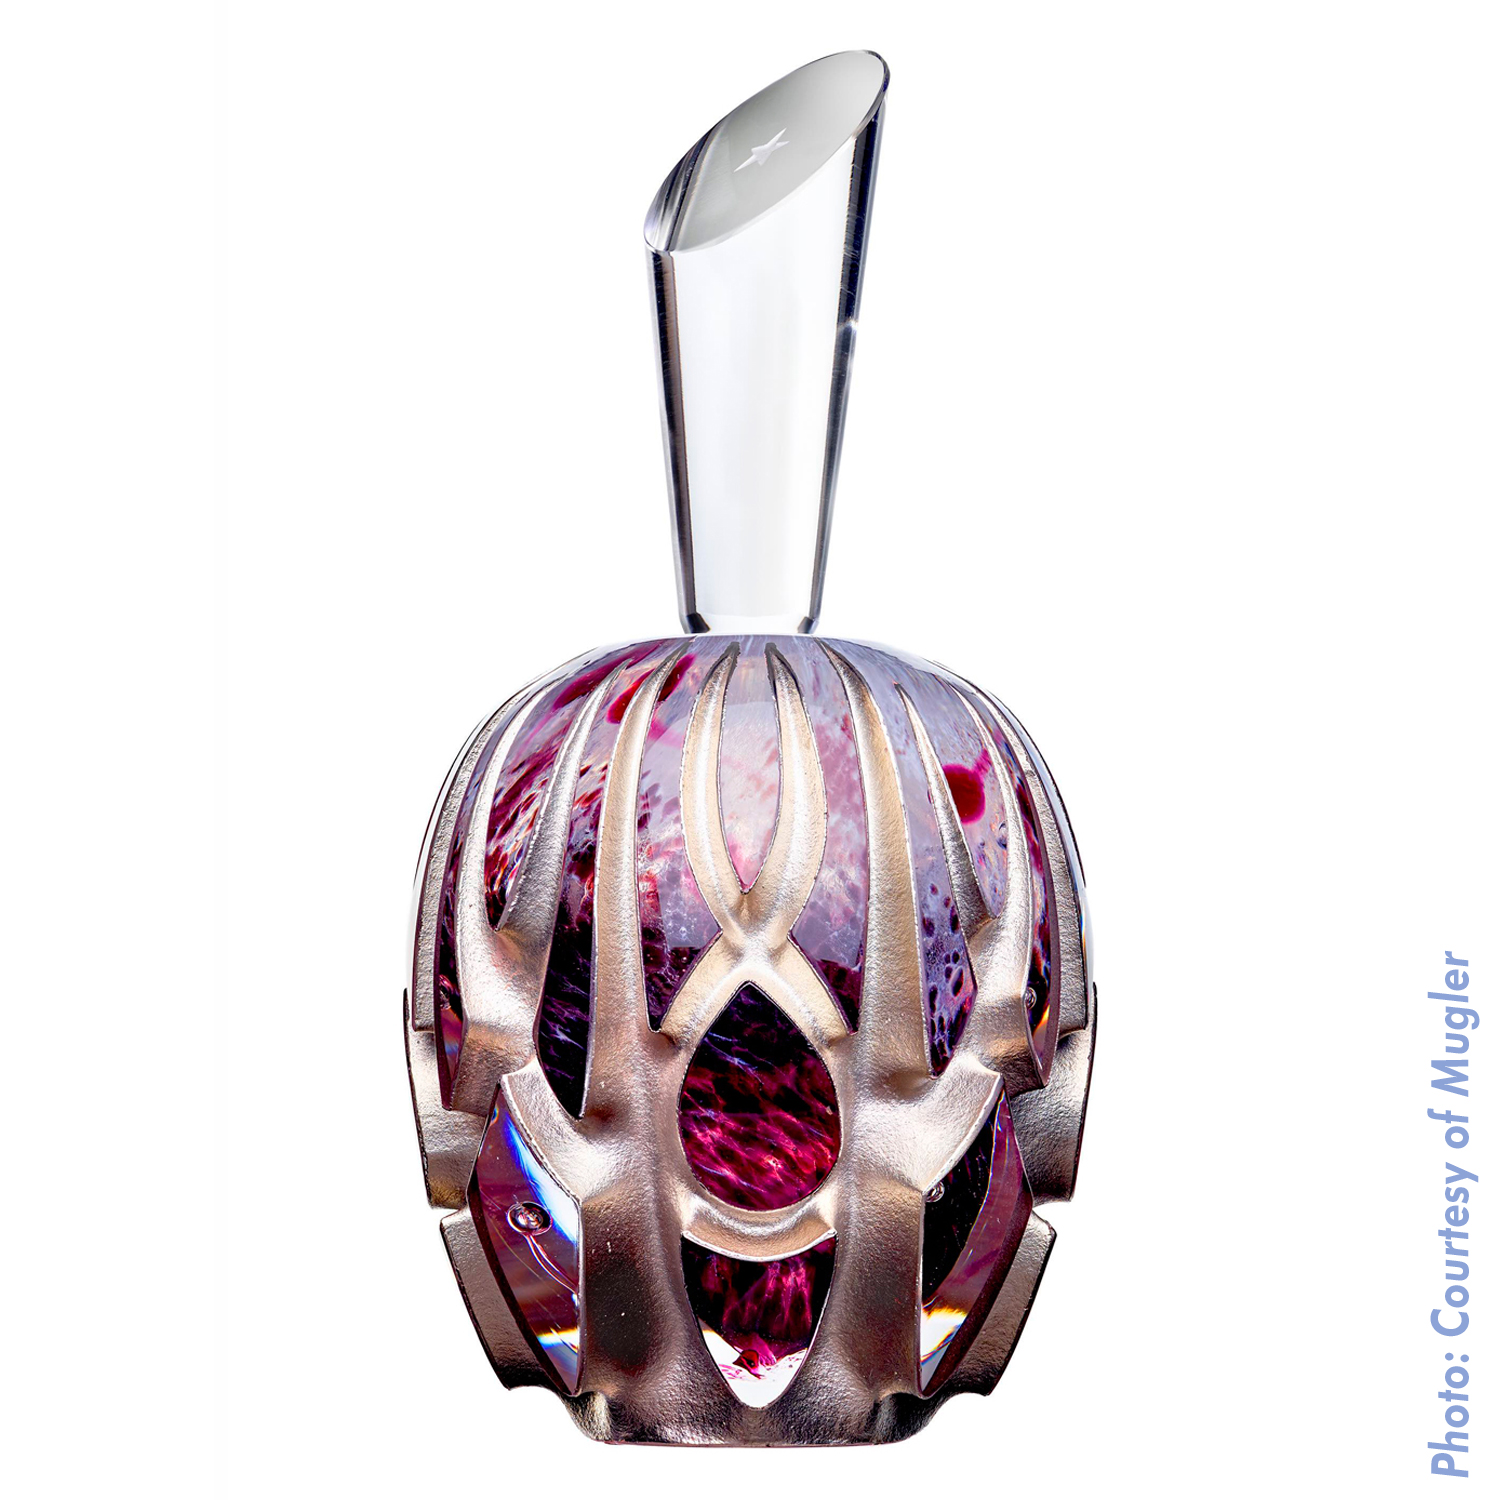 Thierry Mugler Angel Perfume Collector's Limited Edition Bottle 2018 2017 Clouds Cloud Egg Eggs Nuages Unique Art hand Glass Mouthblown Jean-Jacques Urcun Frederic Alary Purple Red thorn spears claws 